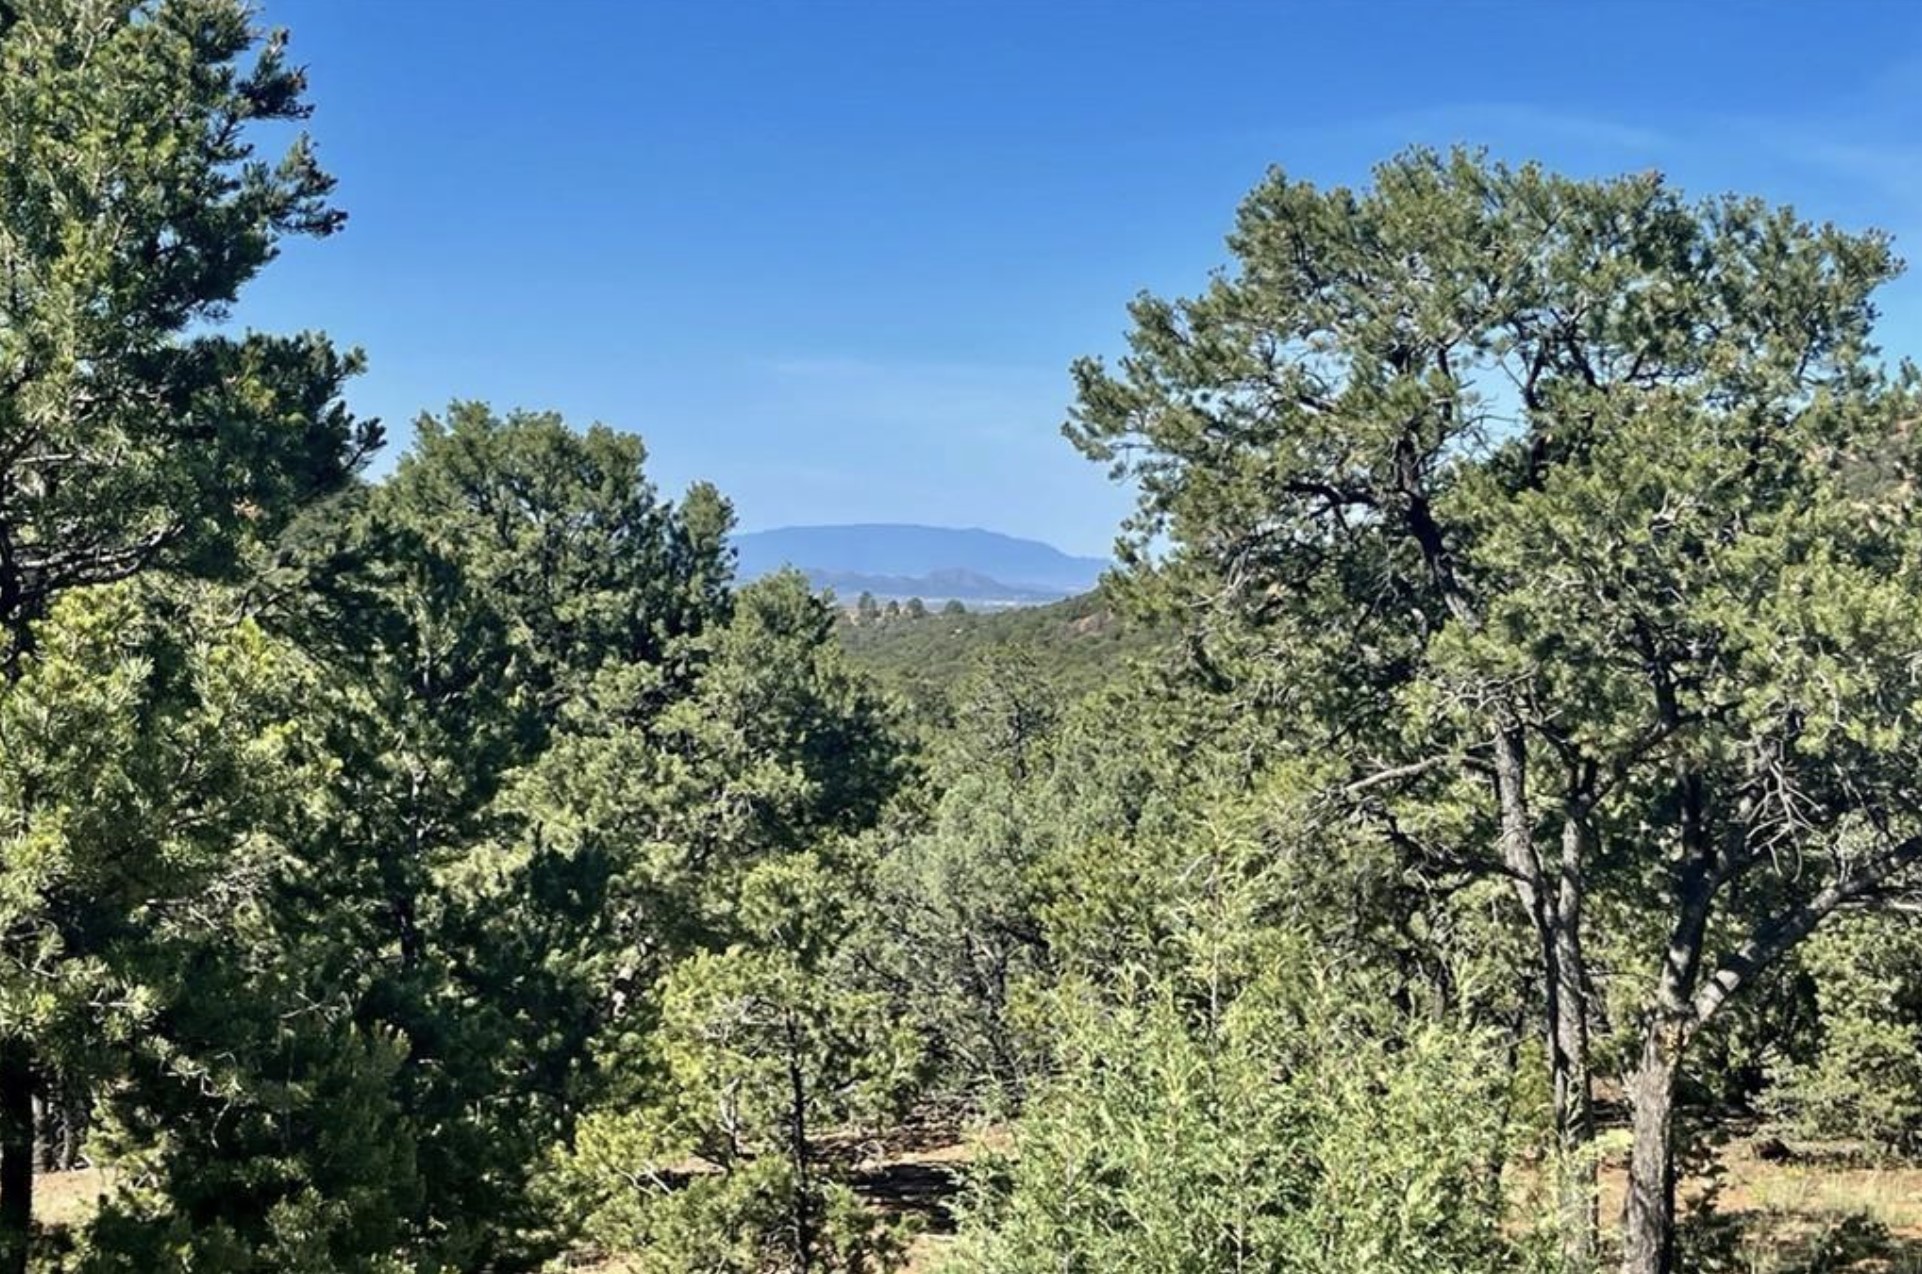 1801 Kachina Heights Lot 1, Santa Fe, New Mexico 87501, 3 Bedrooms Bedrooms, ,3 BathroomsBathrooms,Residential,For Sale,1801 Kachina Heights Lot 1,202340922